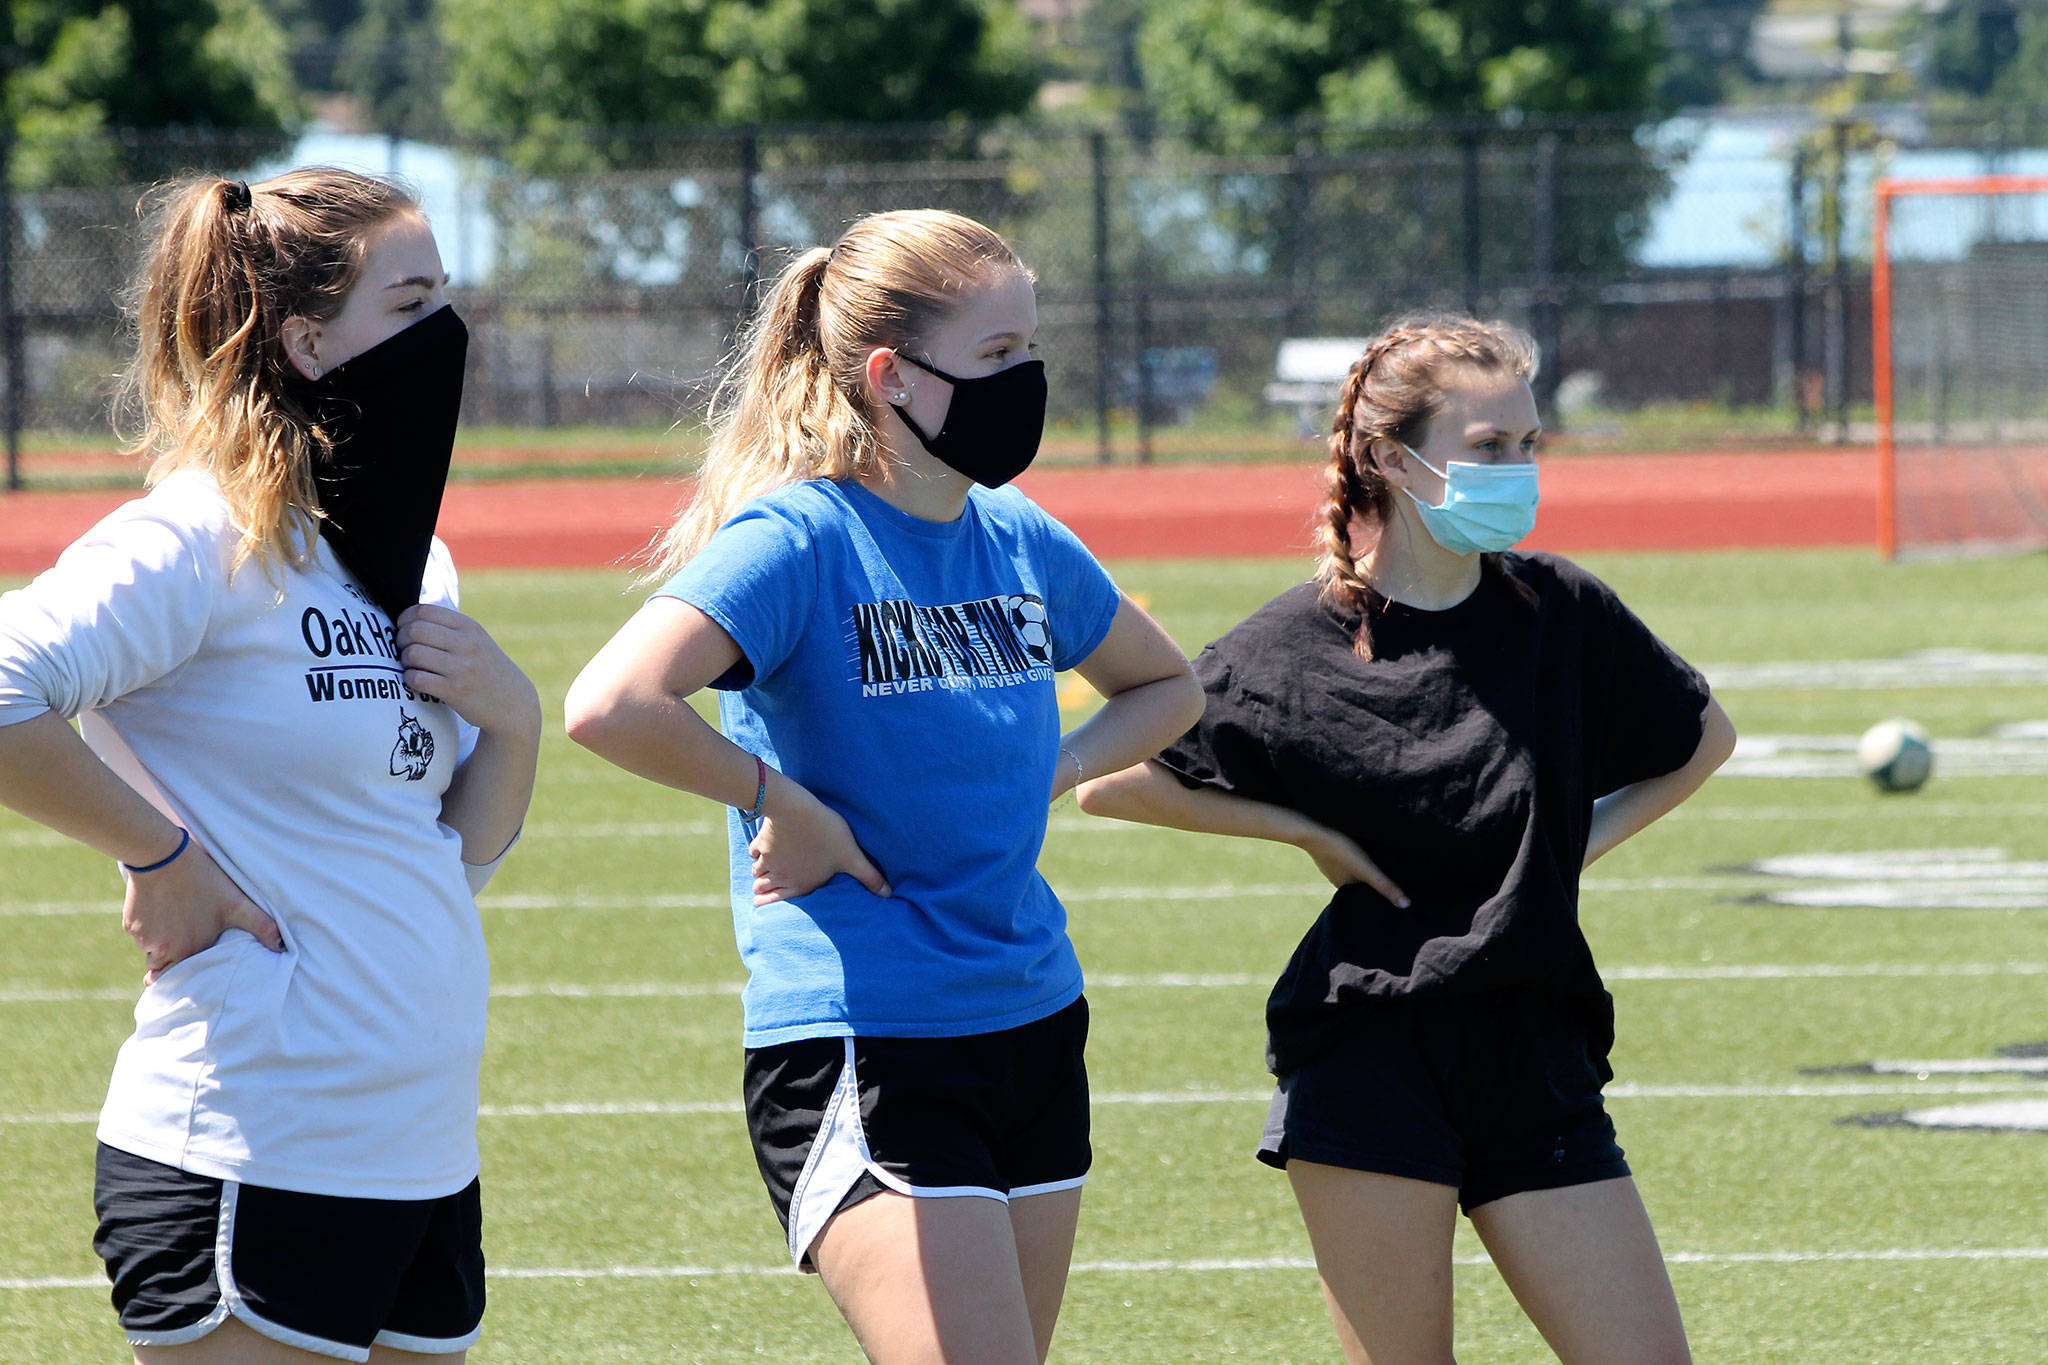 Oak Harbor’s Emma Erskine, left, Bailey Trease and Emily Miller listen to instructions before a drill at offseason workouts Monday. Health guidelines require athletes to wear masks when within six feet of each other. (Photo by Jim Waller/Whidbey News-Times)